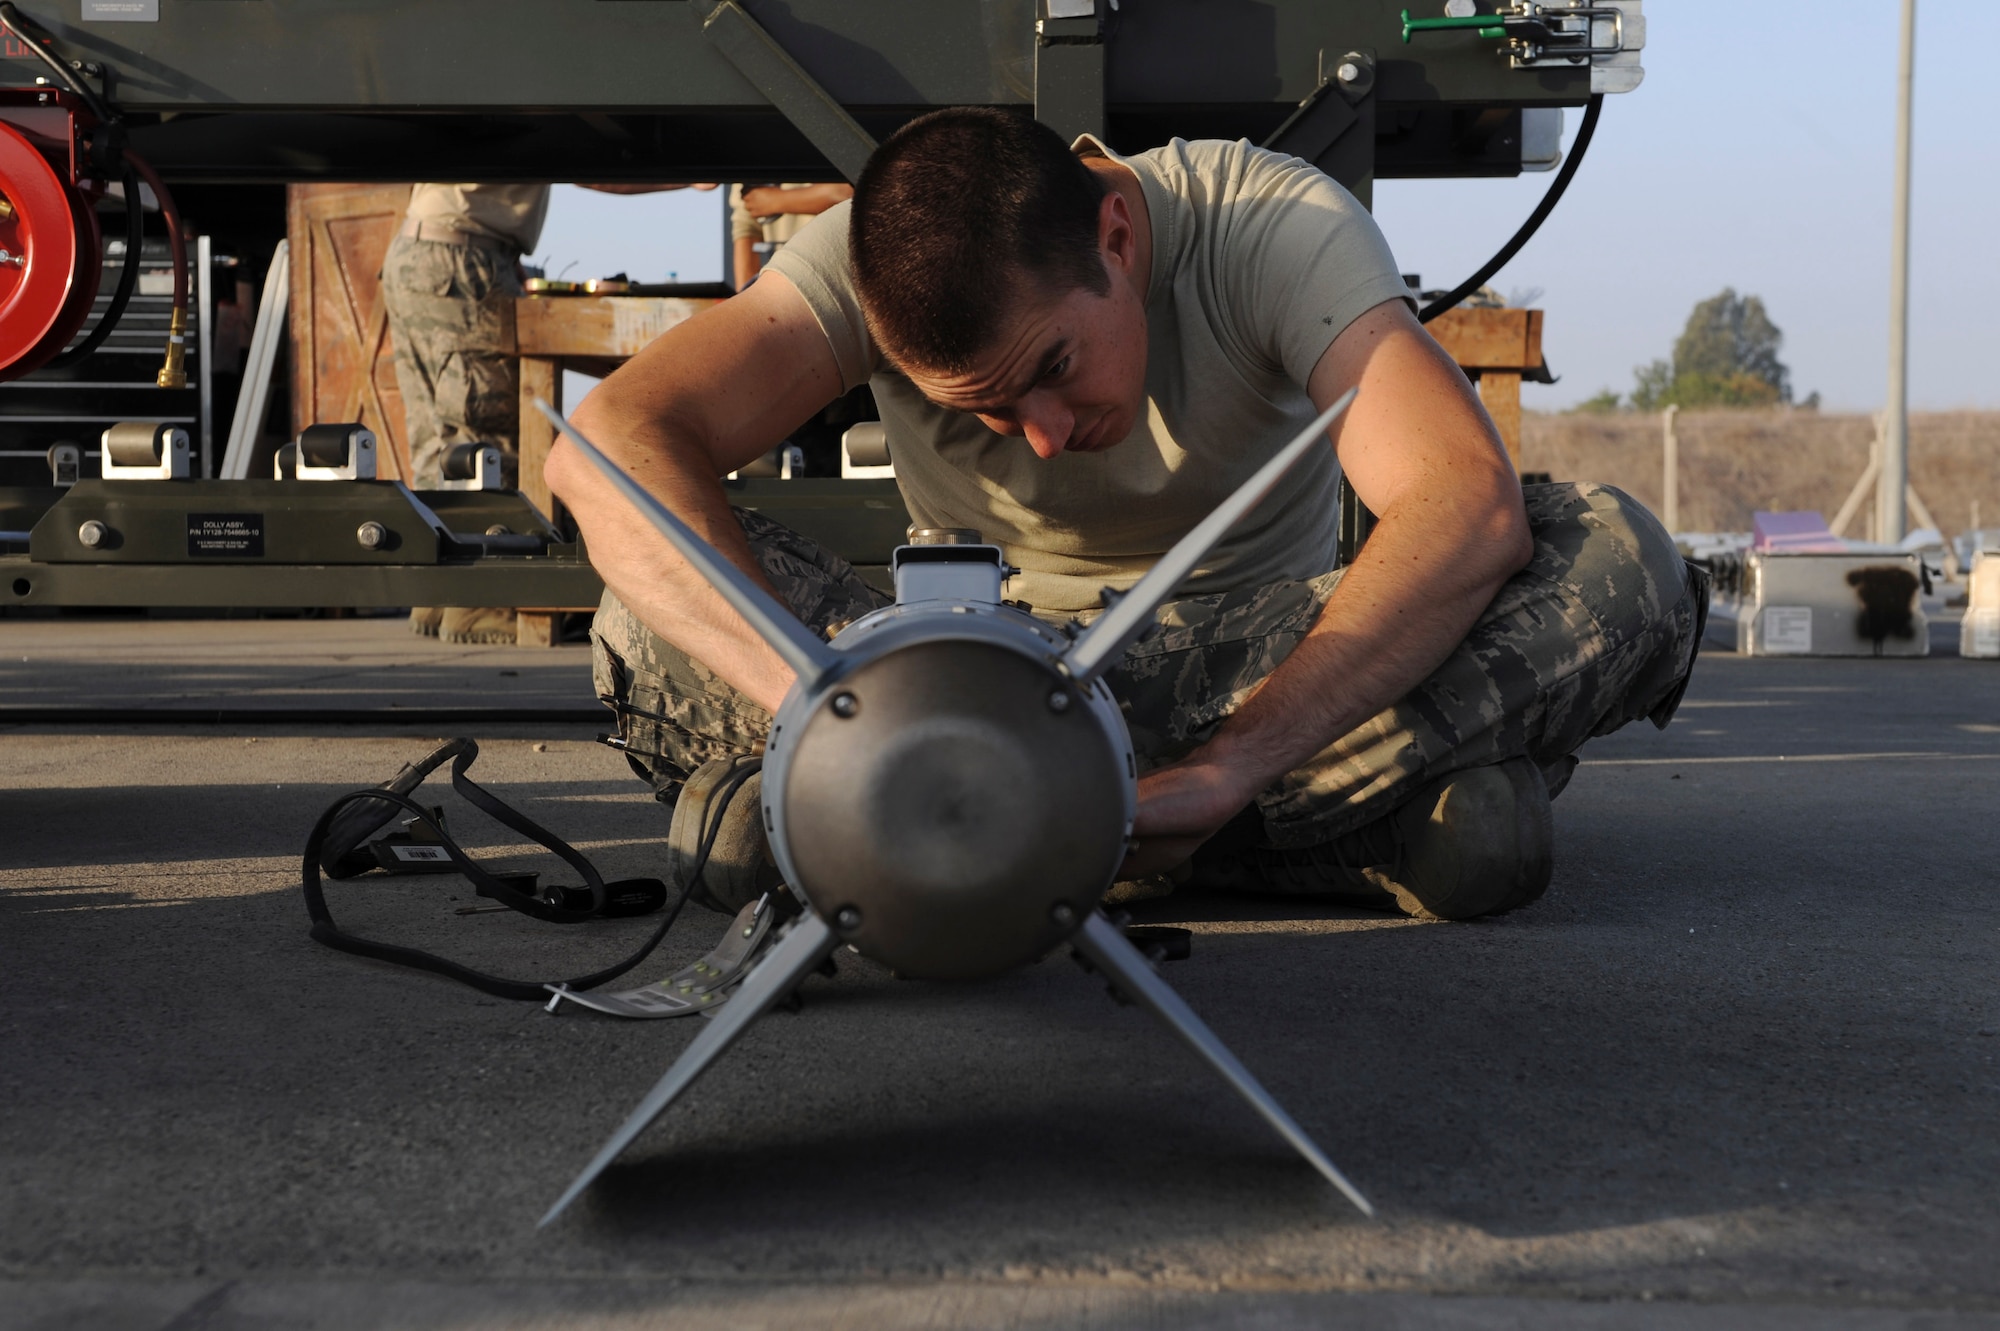 A U.S. Air Force Airman, assigned to the 447th Expeditionary Aircraft Maintenance Squadron, prepares the tail section of a GBU-54 Laser Joint Direct Attack Munition bomb Oct. 29, 2016, at Incirlik Air Base, Turkey. The bombs are tested before either being loaded onto aircraft or placed in a storage area. (U.S. Air Force photo by Airman 1st Class Devin M. Rumbaugh)